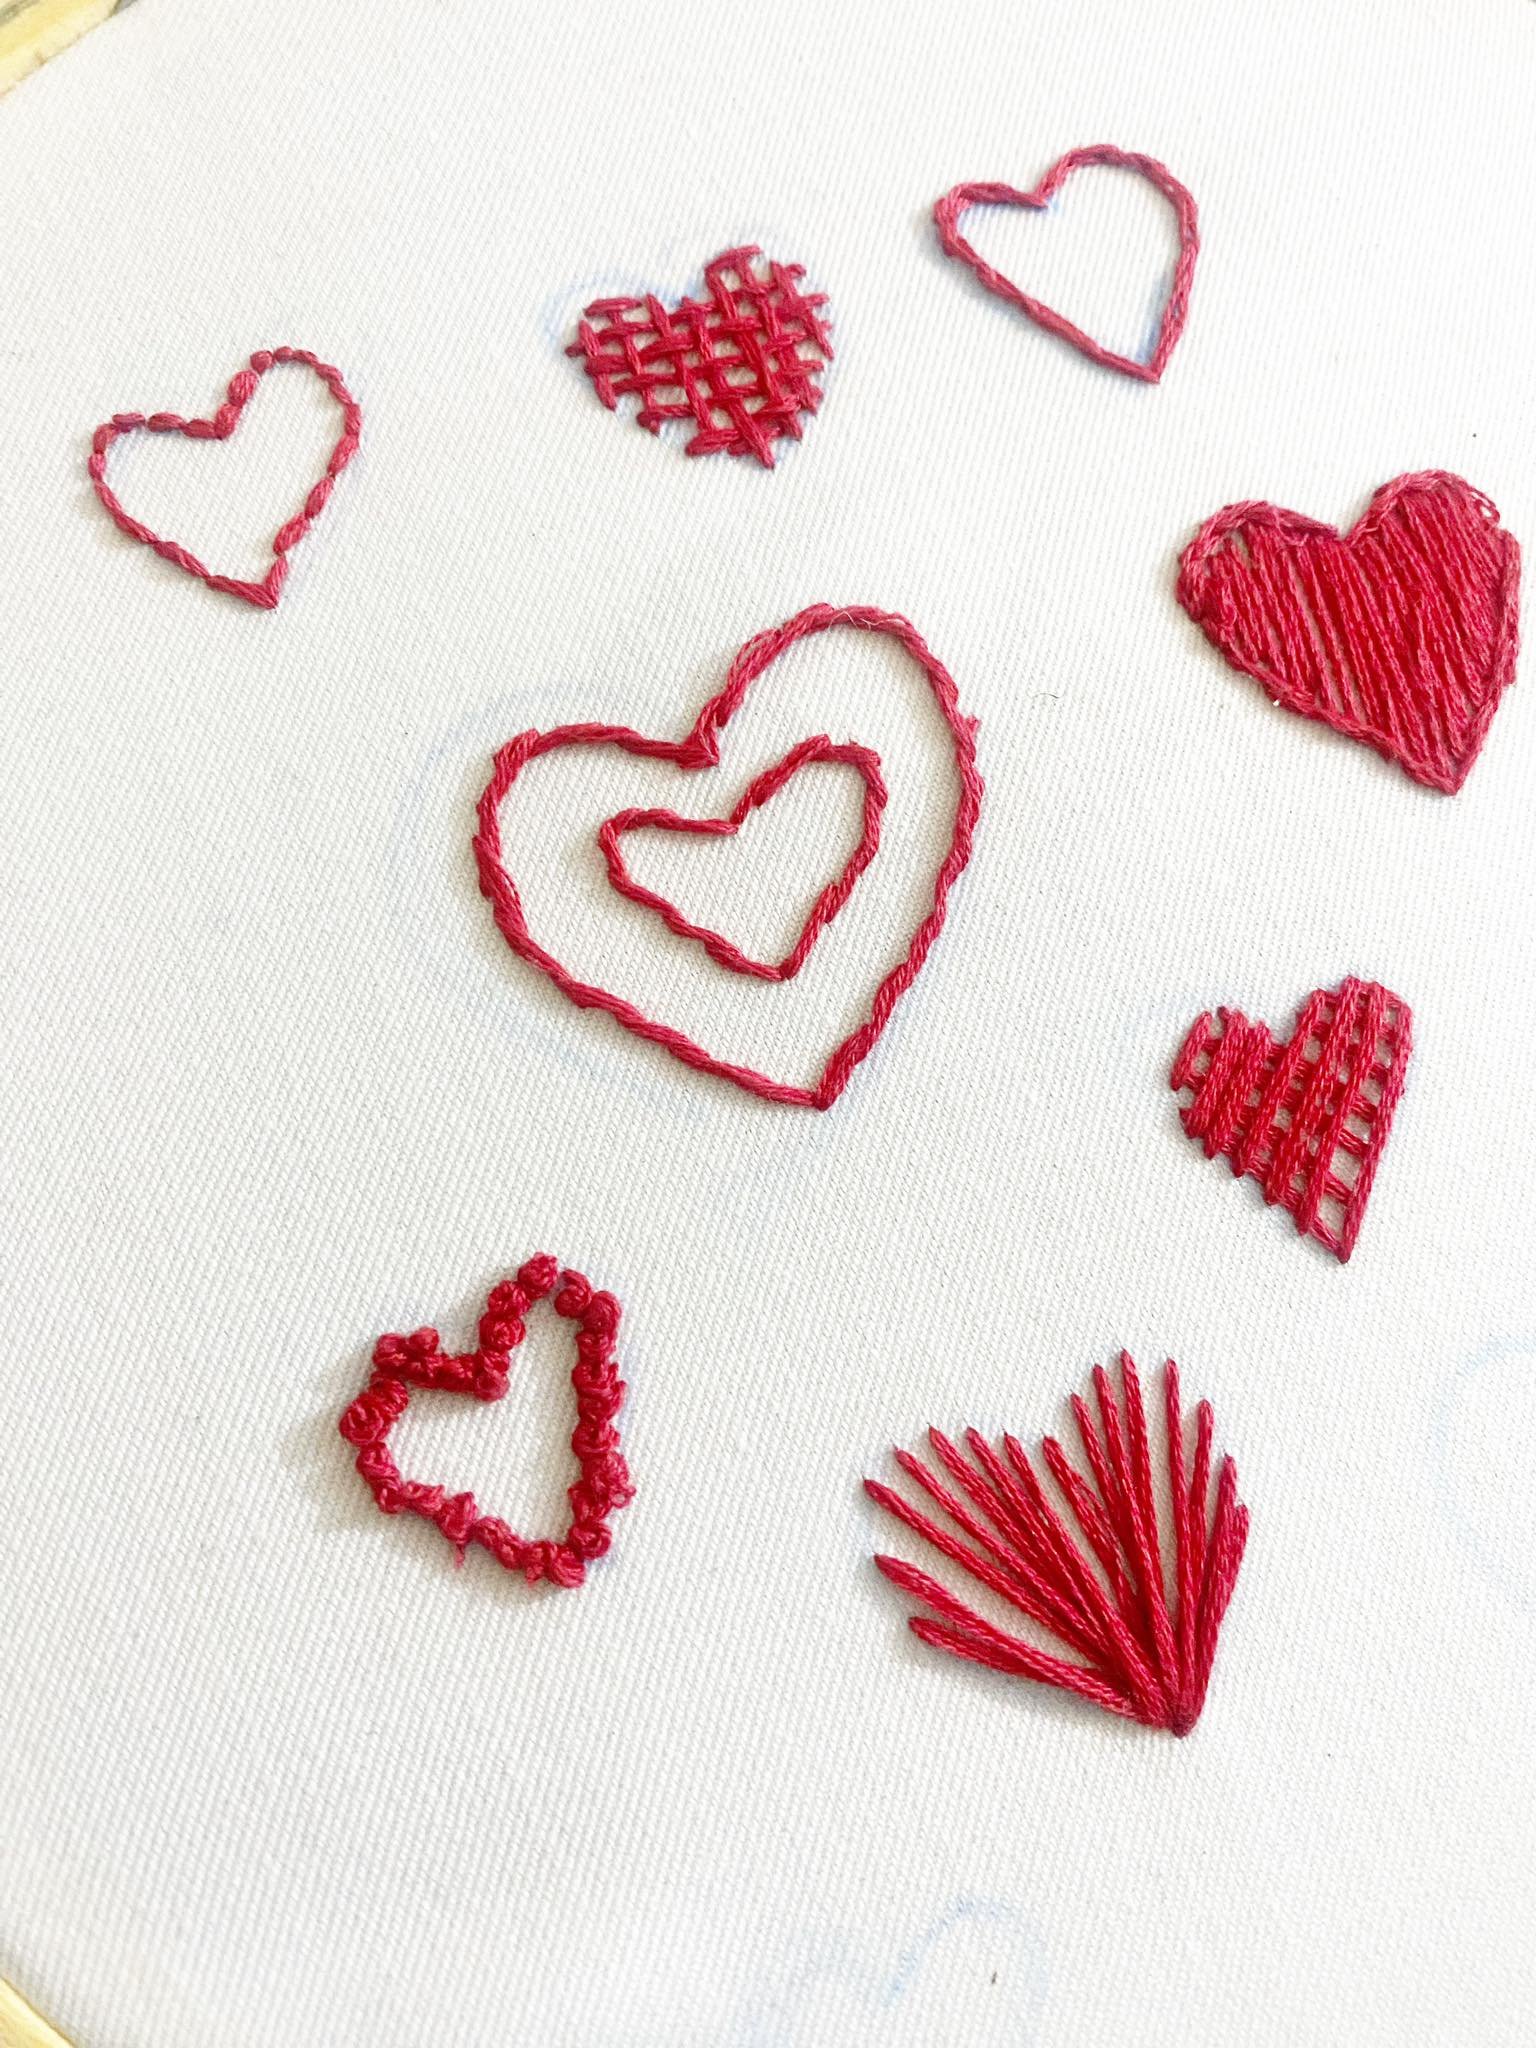 Valentine’s Day Heart Embroidery | How to Embroider a Heart